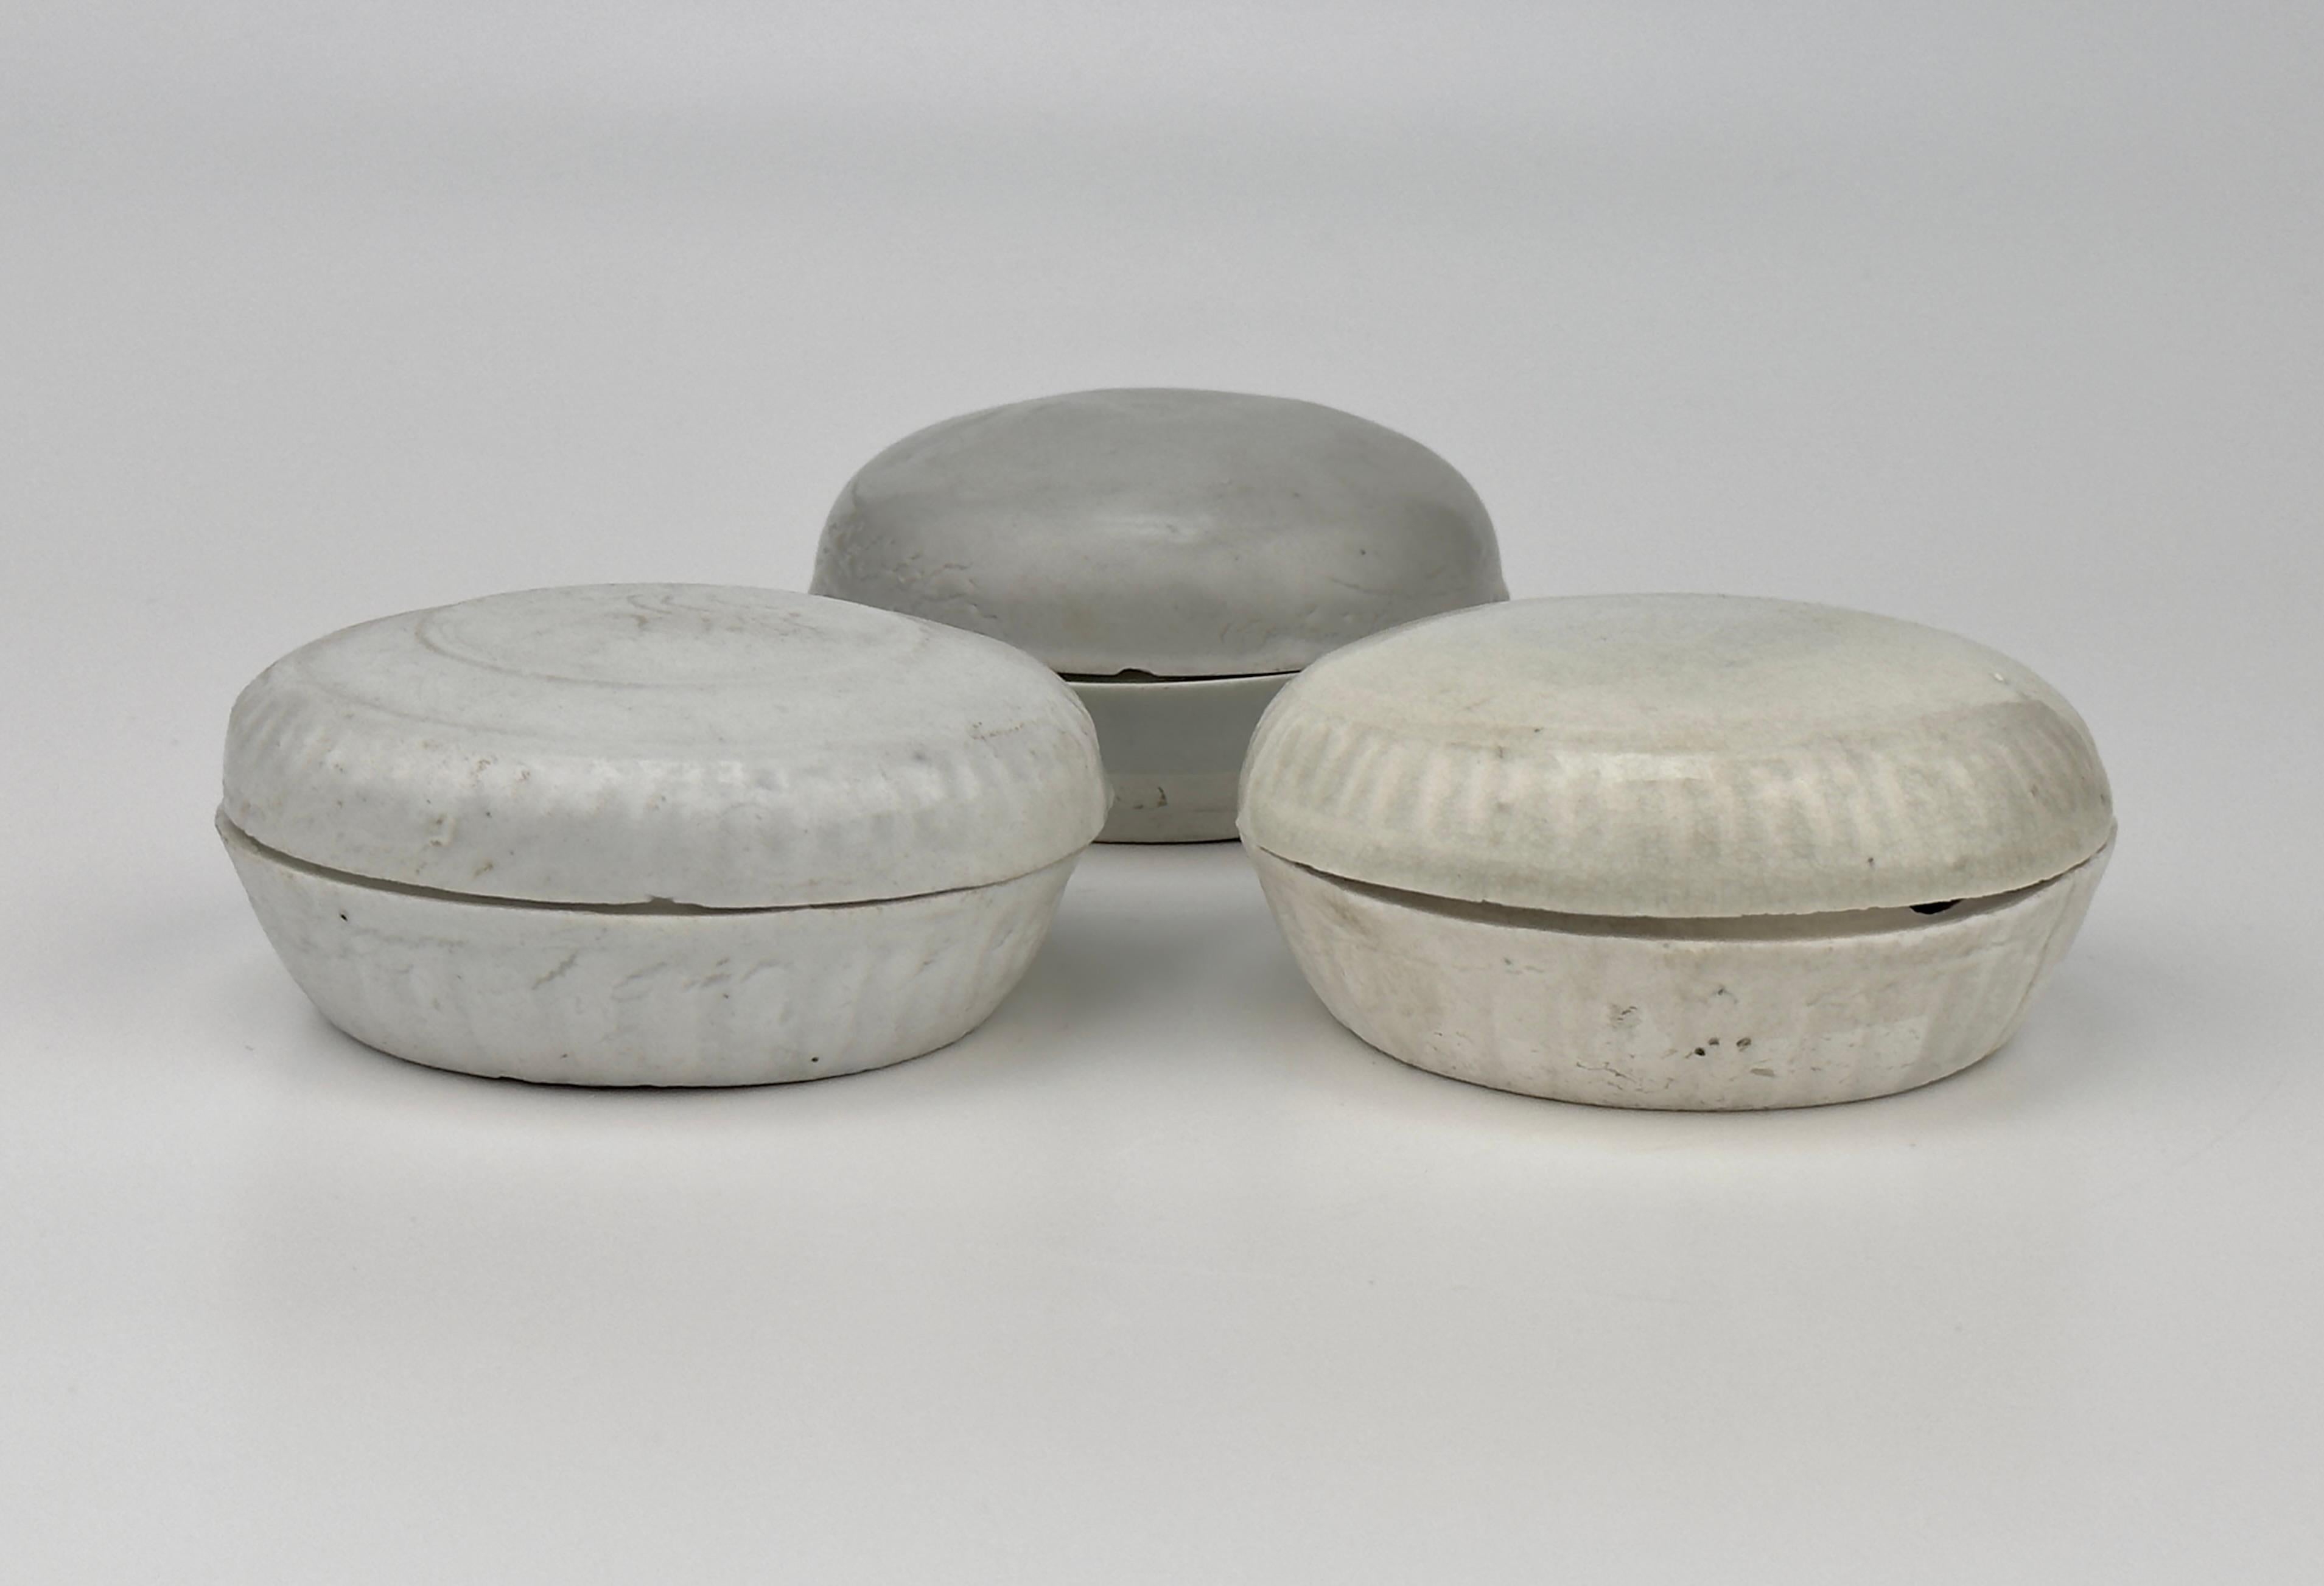 Three White glazed boxes from the Qing dynasty Vung Tau cargo. Identical pieces are included on page 459 of the Vung Tau catalog titled 'Christies Amsterdam 1992'


Period : Qing Dynasty, Kangxi Period
Production Date : 1690-1699
Made in :